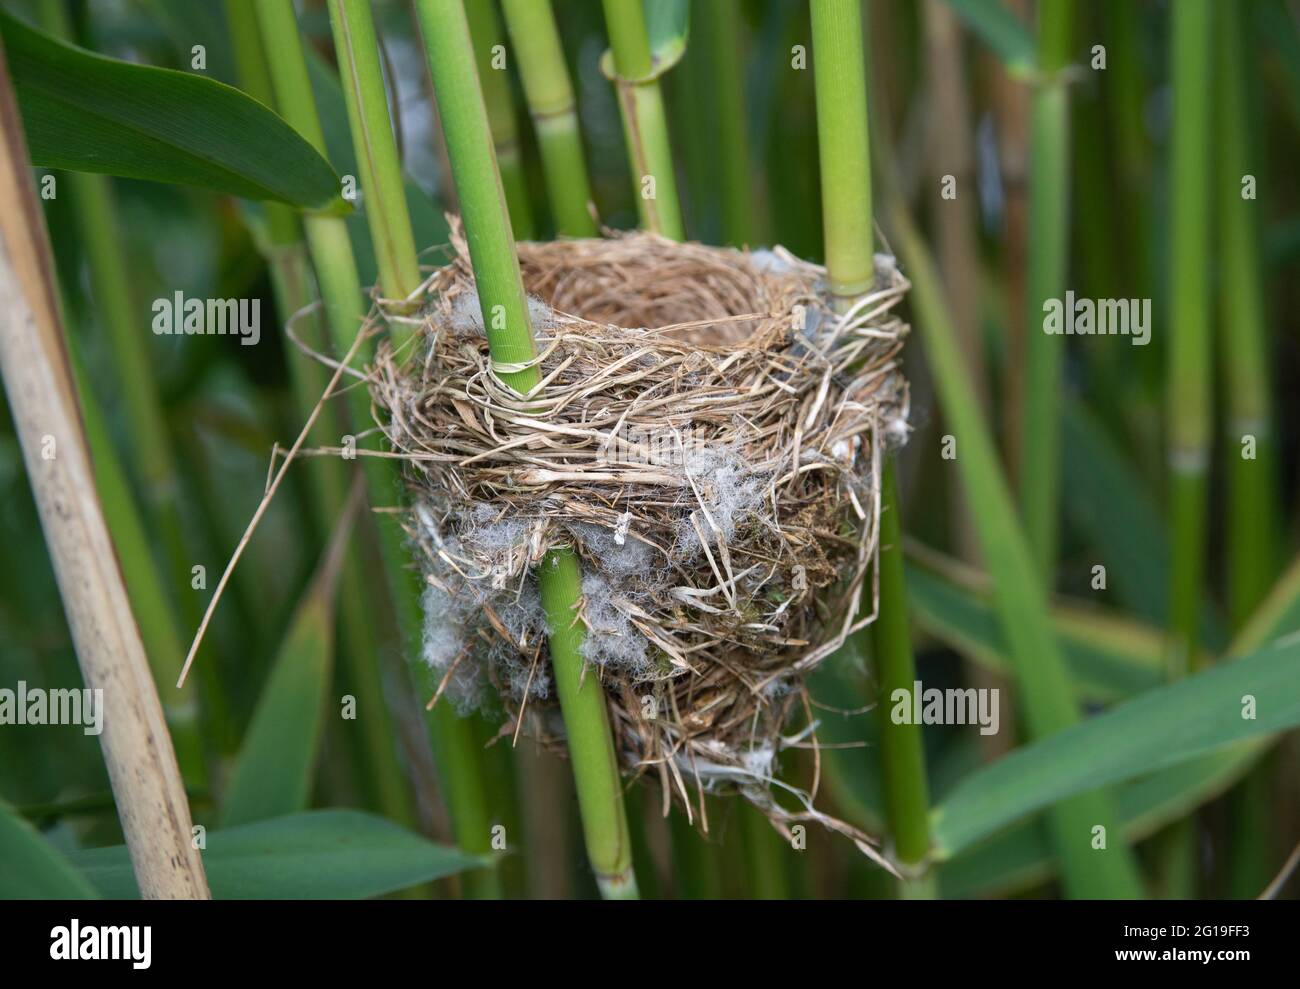 Nest of Reed Warbler , Acrocephalus scirpaceus, Brent Reservoir , Londra, Regno Unito Foto Stock